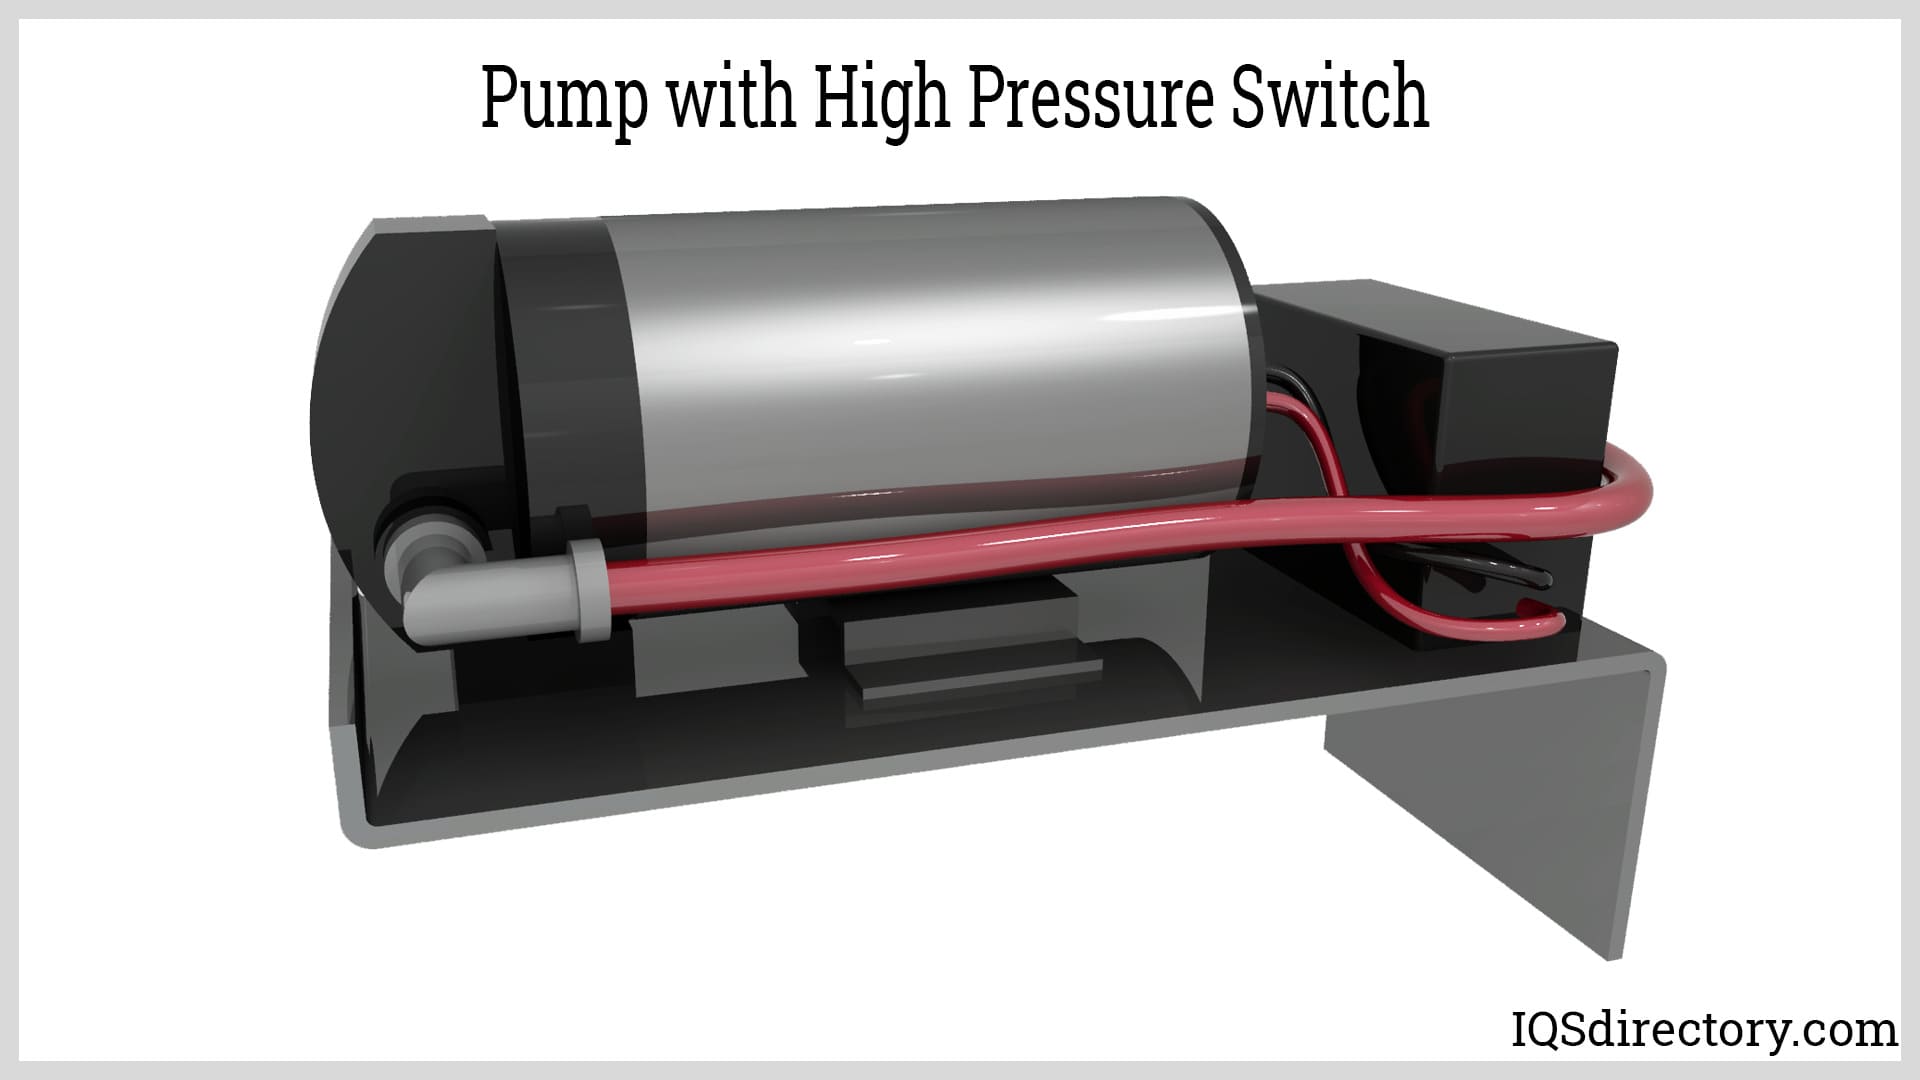 Pump with High Pressure Switch